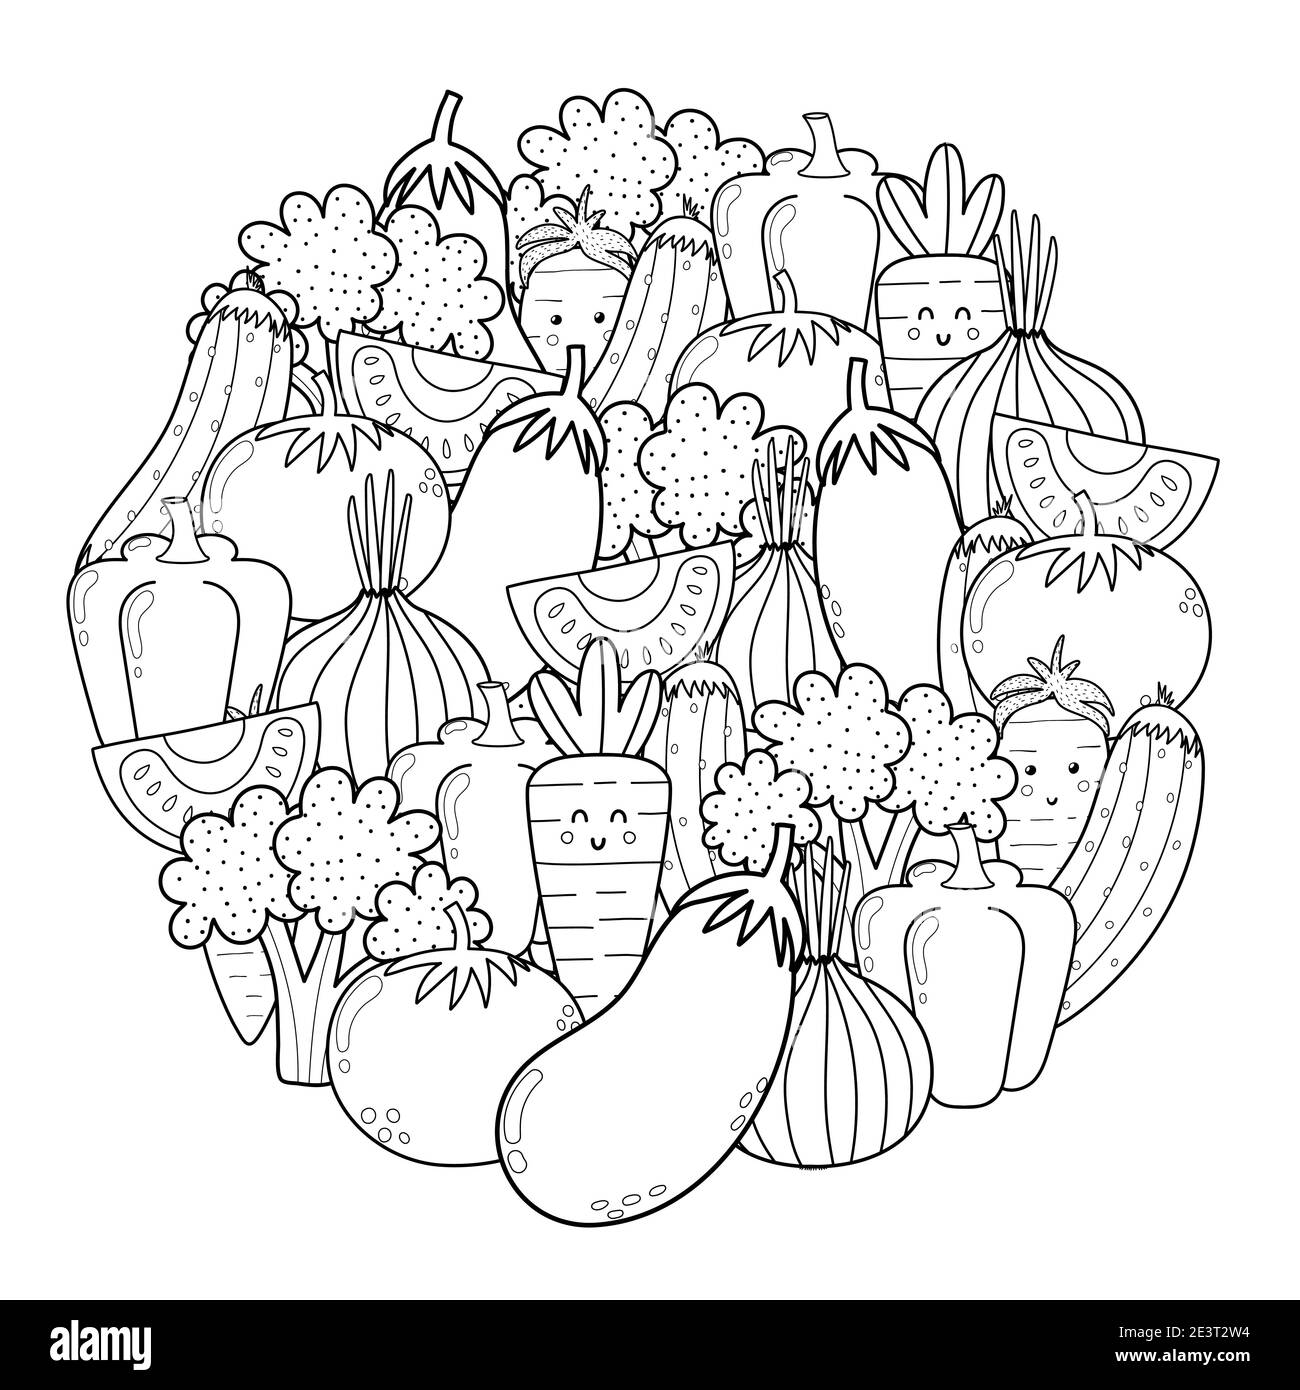 Circle shape coloring page with doodle vegetables. Eco food black and white print for coloring book Stock Vector